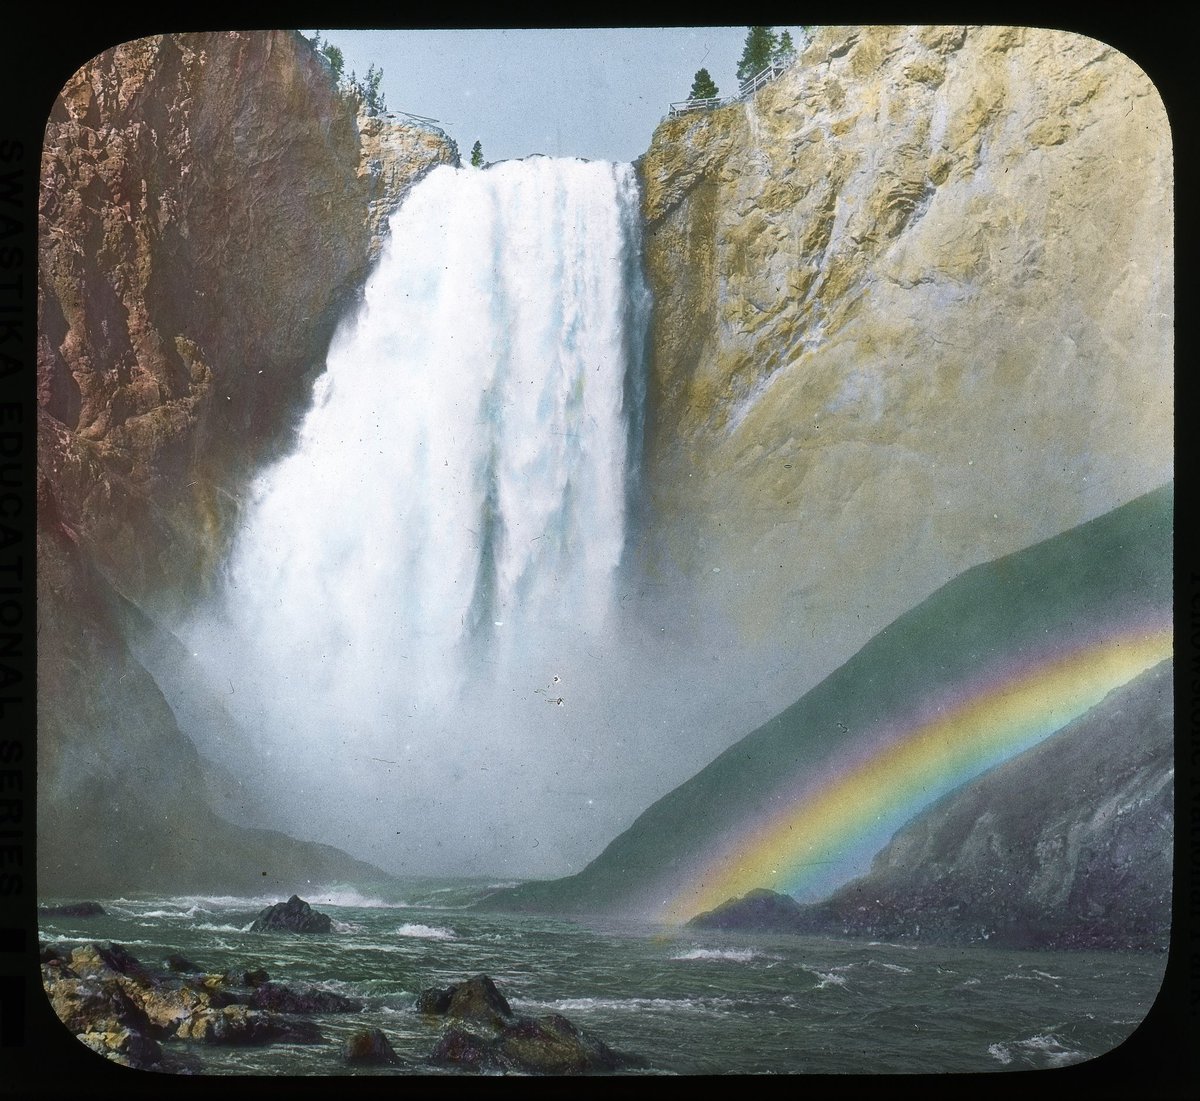 #YellowstoneNationalPark, #LowerFalls of the #YellowstoneRiver
#Yellowstone , Bryce Canyon, Crater Lake Moon Craters, 1959 - 1960
Series: Henry Peabody Collection, 1959 - 1960
Records of the #NationalParkService, 1785 - 2006